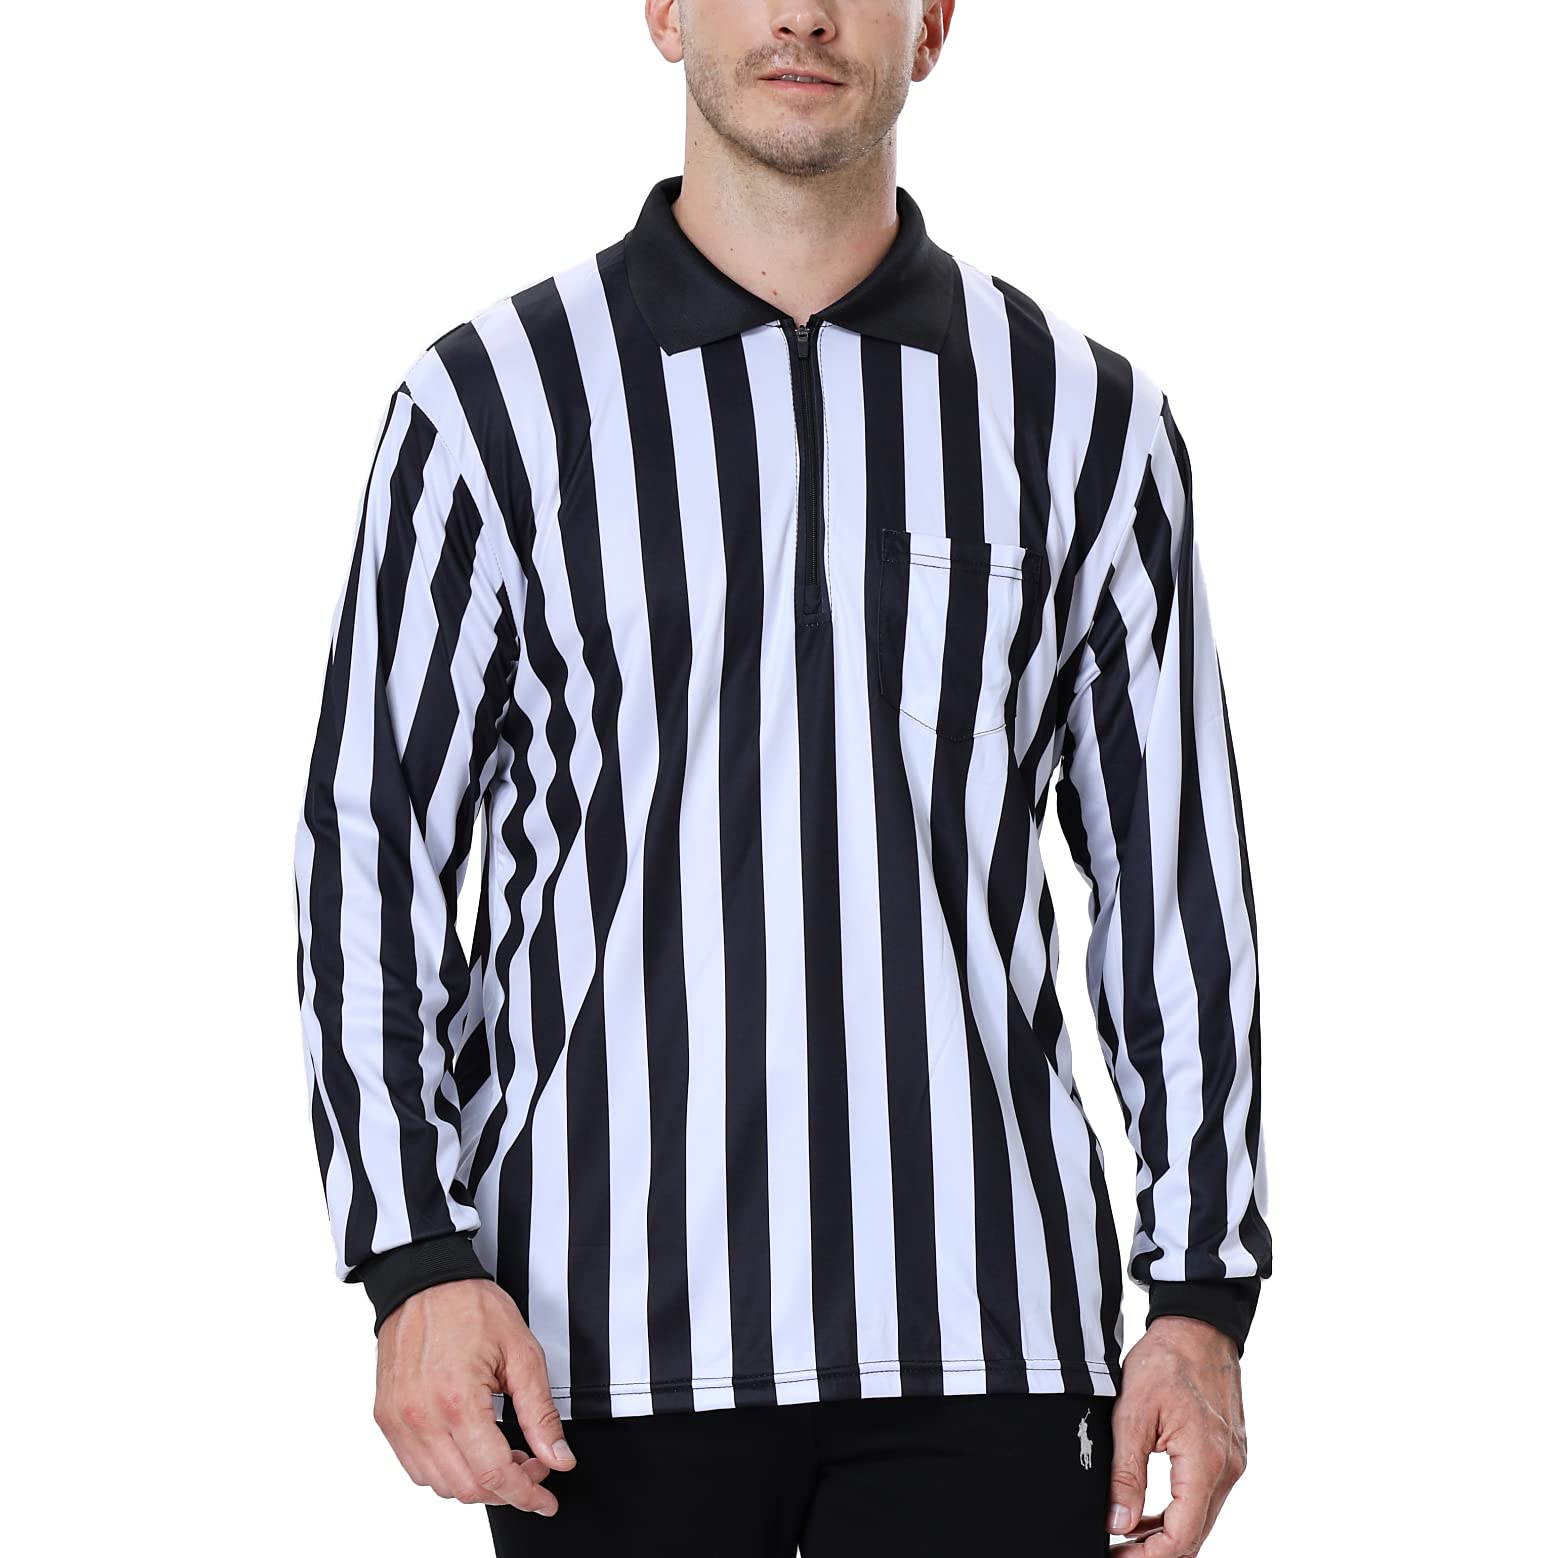 TOPTIE Men's Official Long Sleeve Black & White Striped Referee Shirt,  Pro-Style Ref Umpire Jersey X-Large